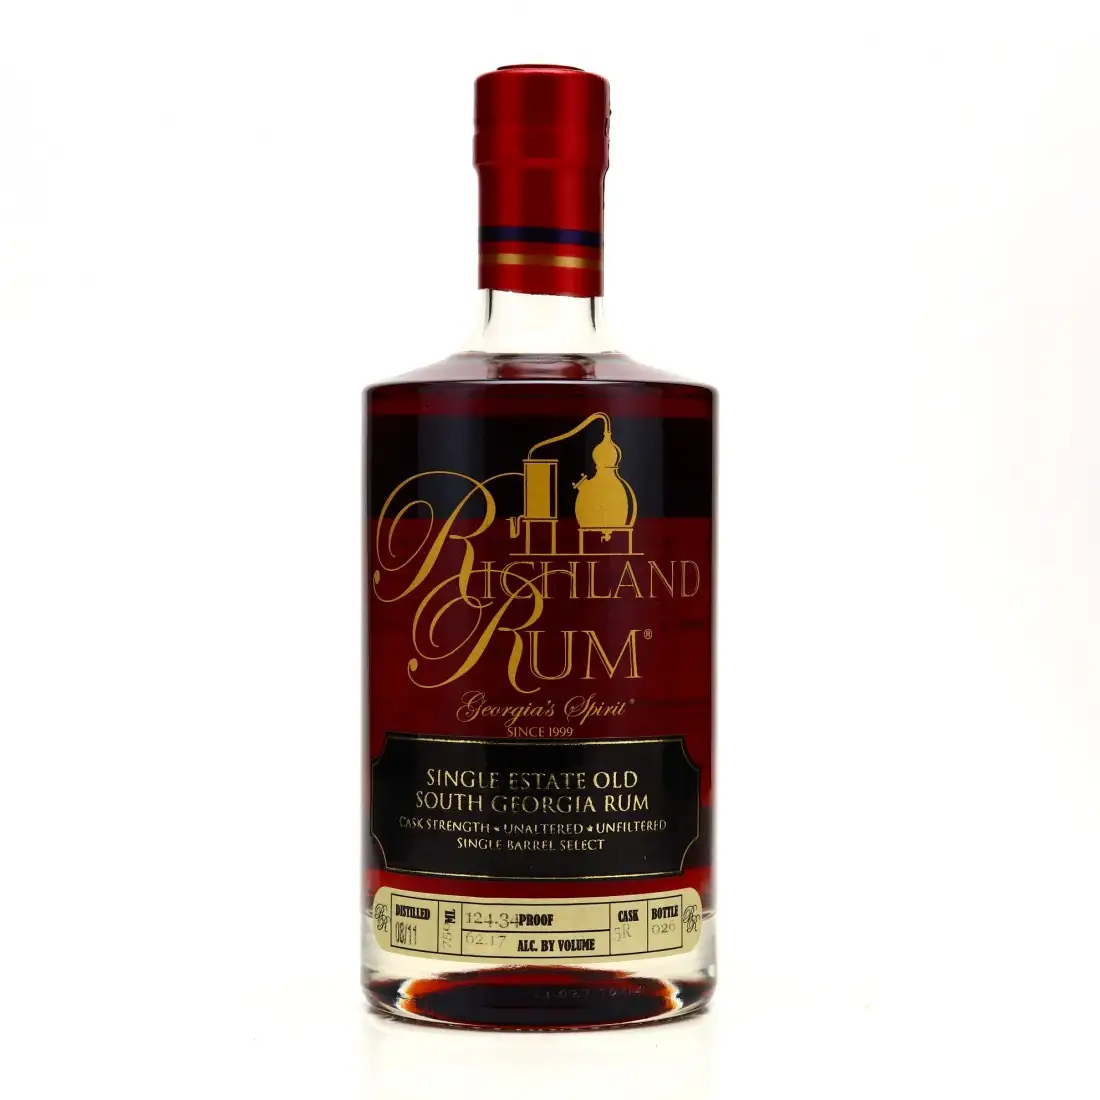 Image of the front of the bottle of the rum Single Estate Old South Georgia Rum (Romhatten Cask #2)